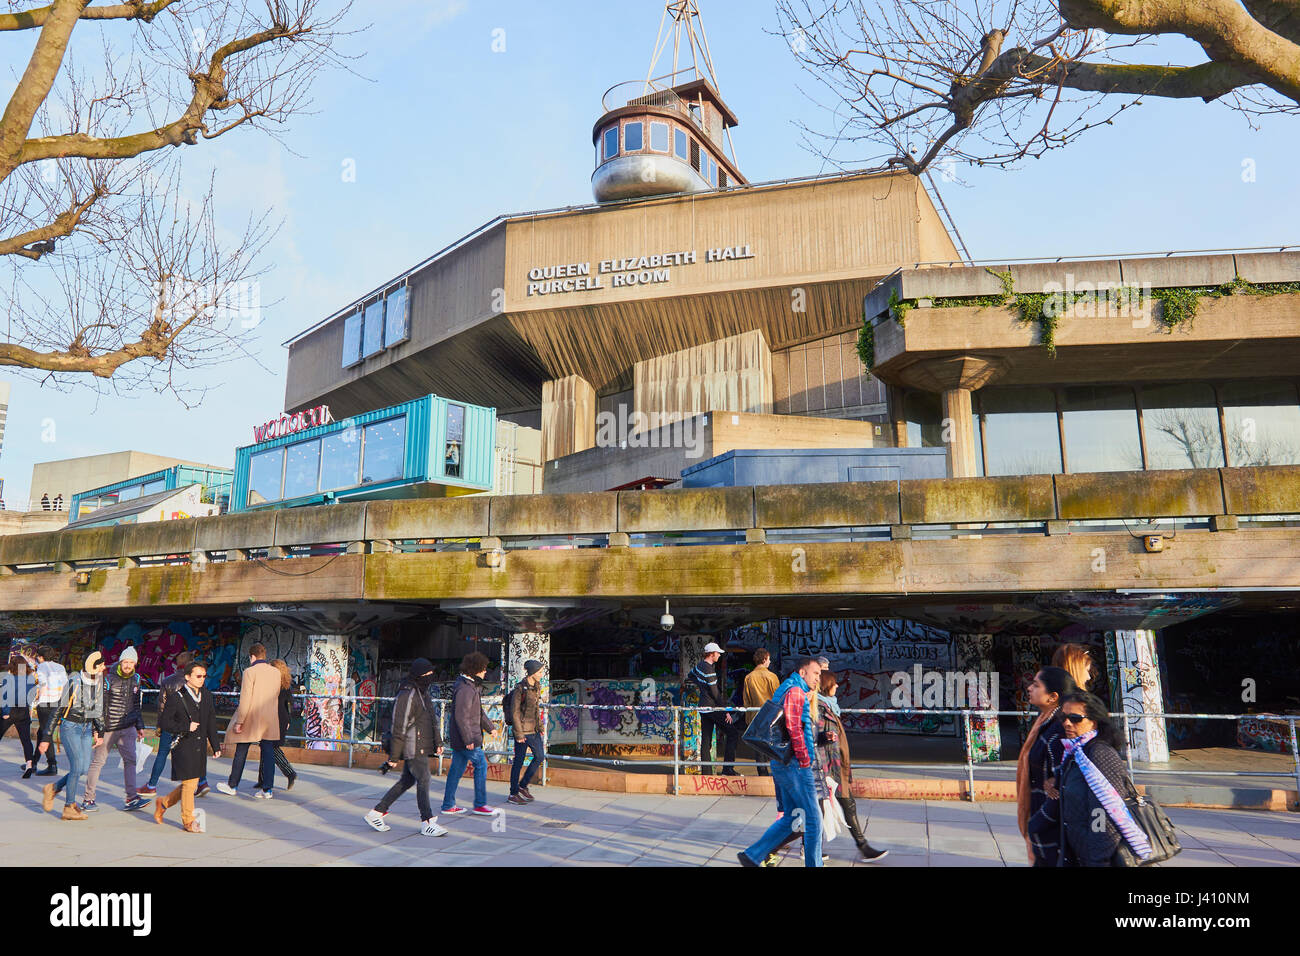 Queen Elizabeth Hall und Purcell Room (1967), South Bank, London, England Stockfoto